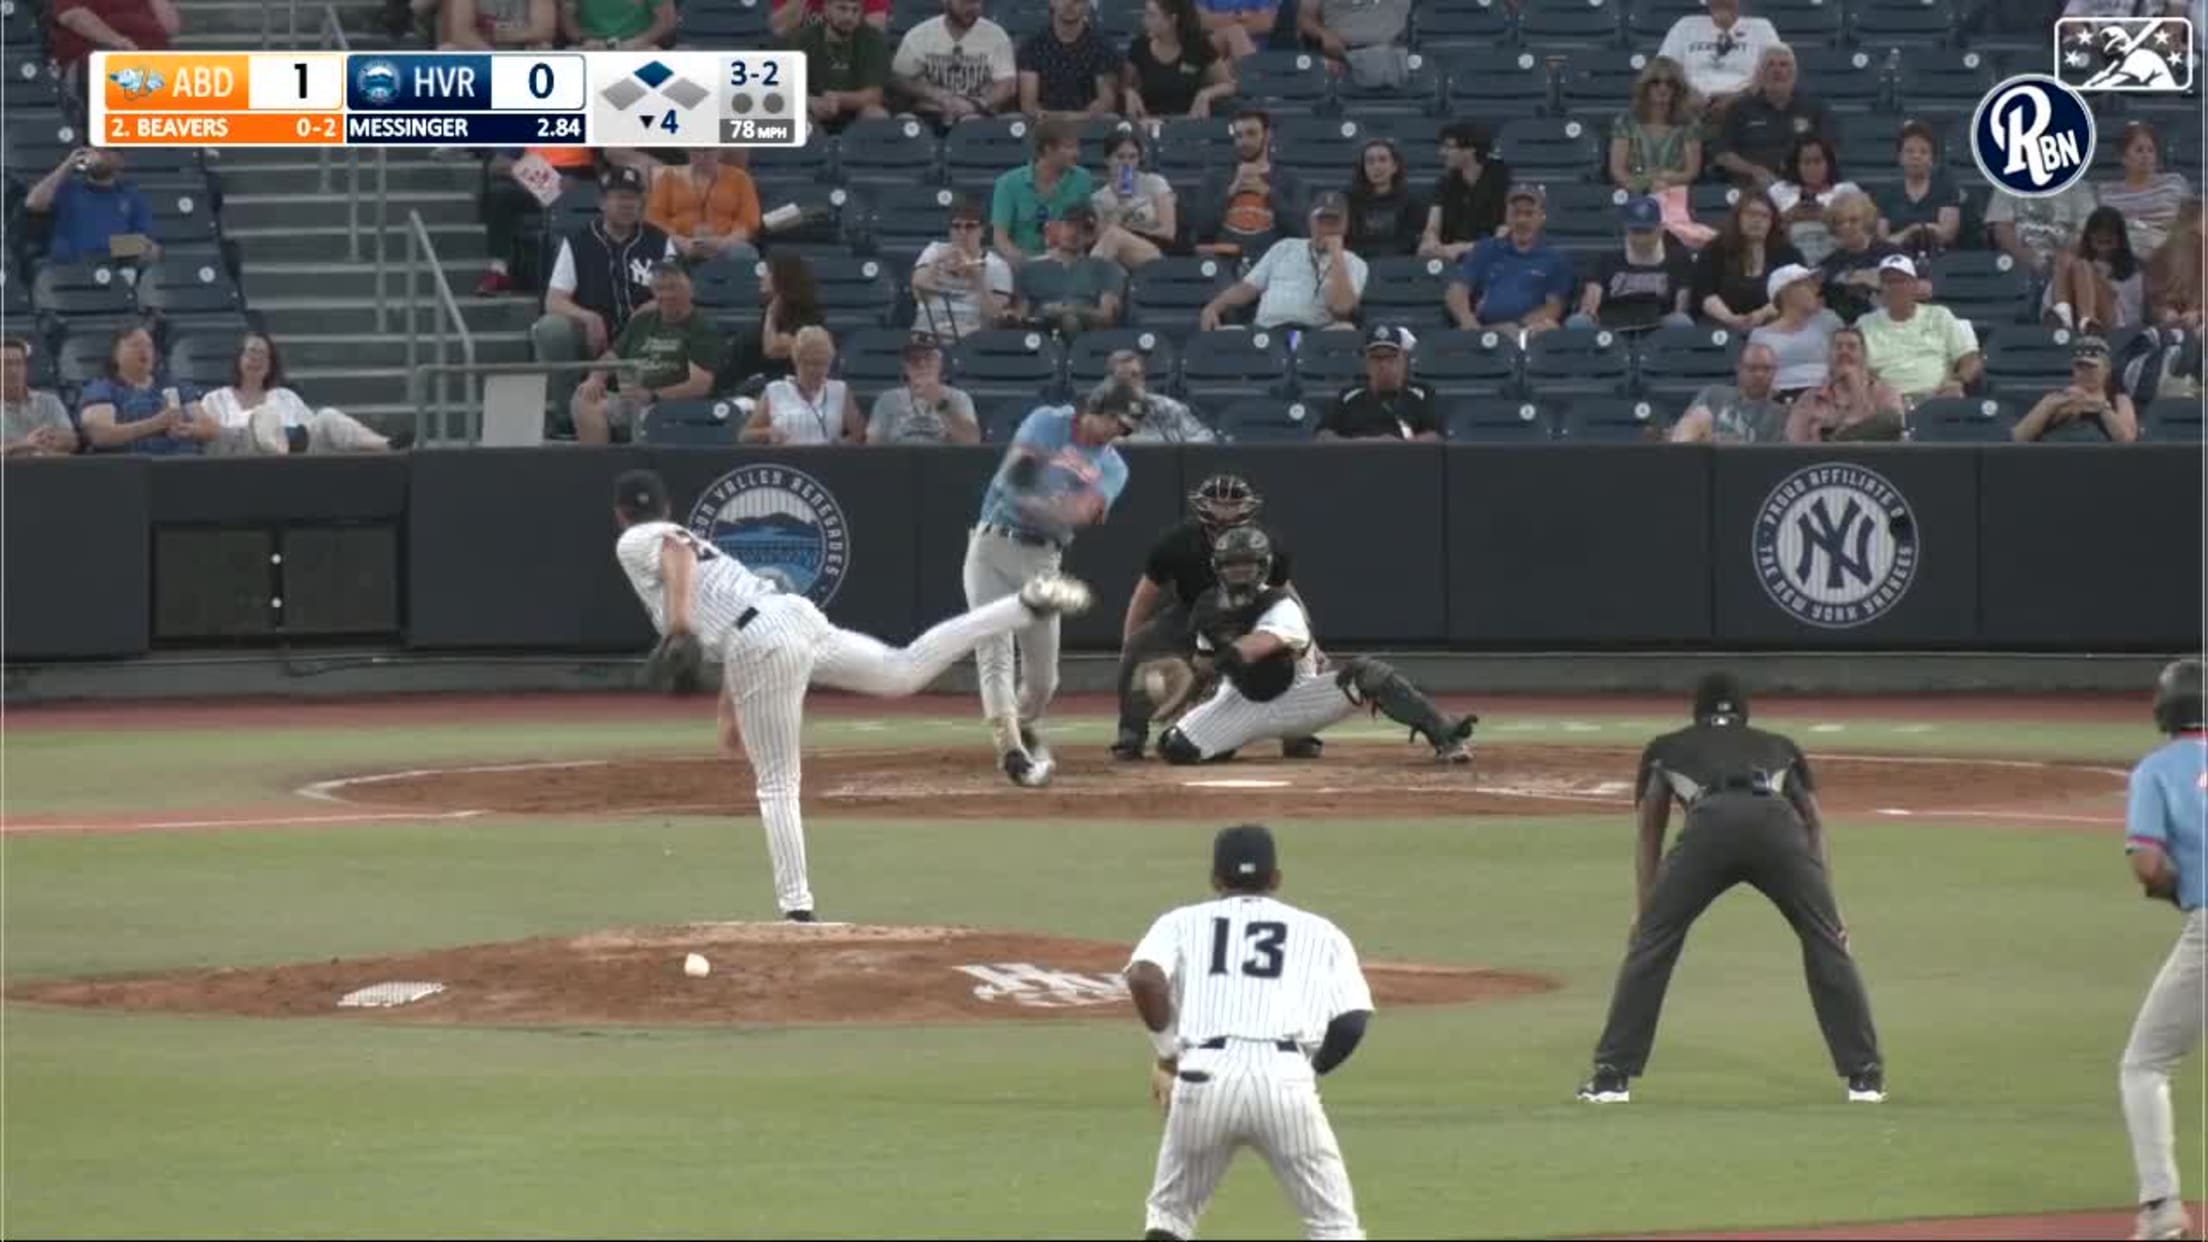 Zach Messinger's 9th strikeout 